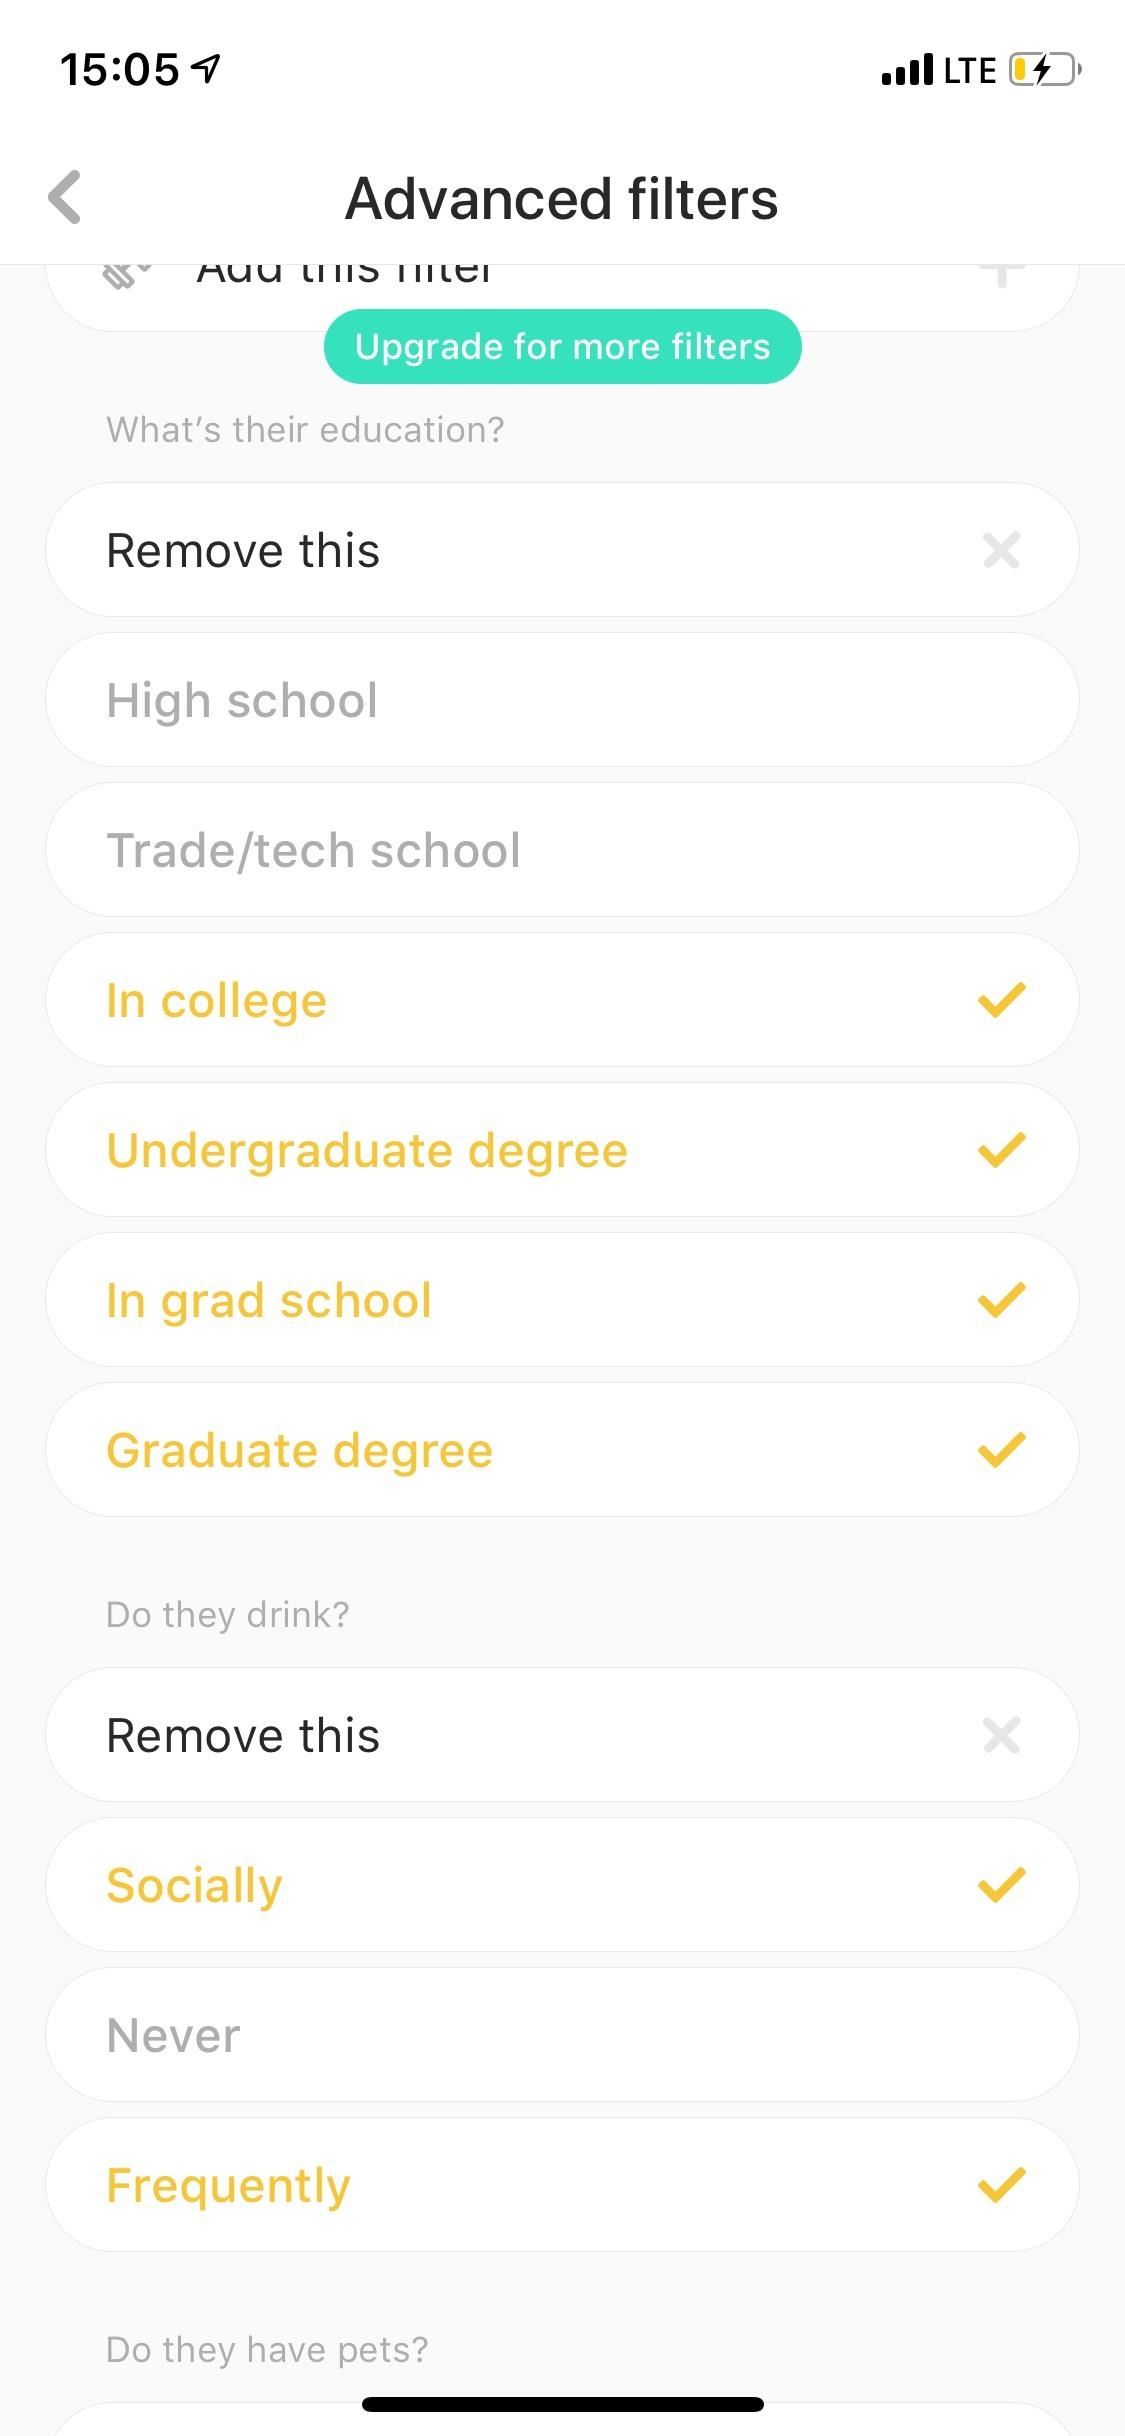 How to Filter Potential Matches on Bumble